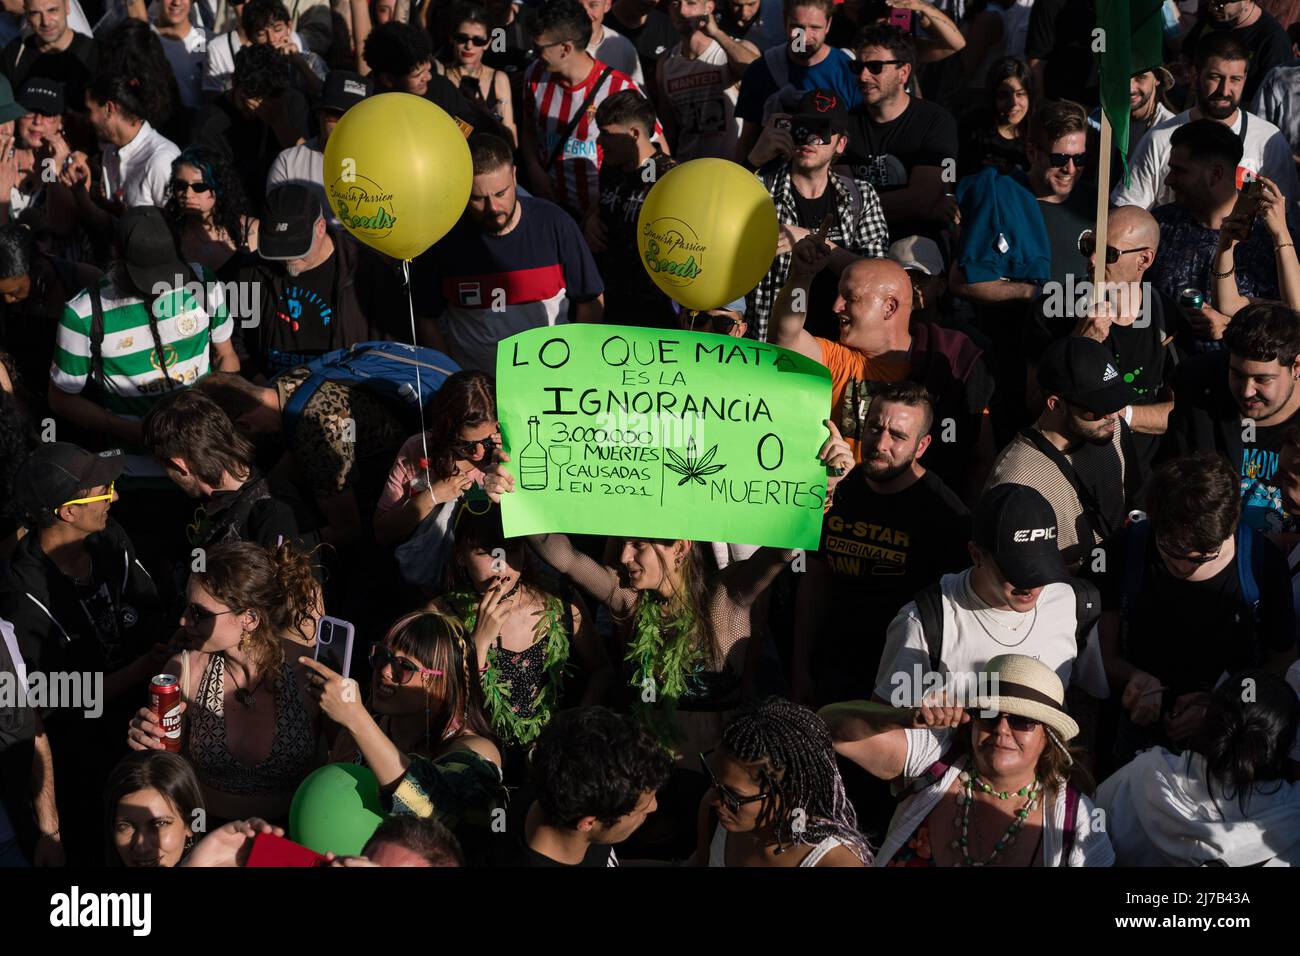 Protesters hold anti-alcohol and pro-cannabis placard during the demonstration. Thousands of pro-cannabis activists took part in a demonstration in La Gran Via in Madrid, Spain, in favor of legalizing the medicinal and recreational use of marijuana. (Photo by Diego Radames / SOPA Images/Sipa USA) Stock Photo